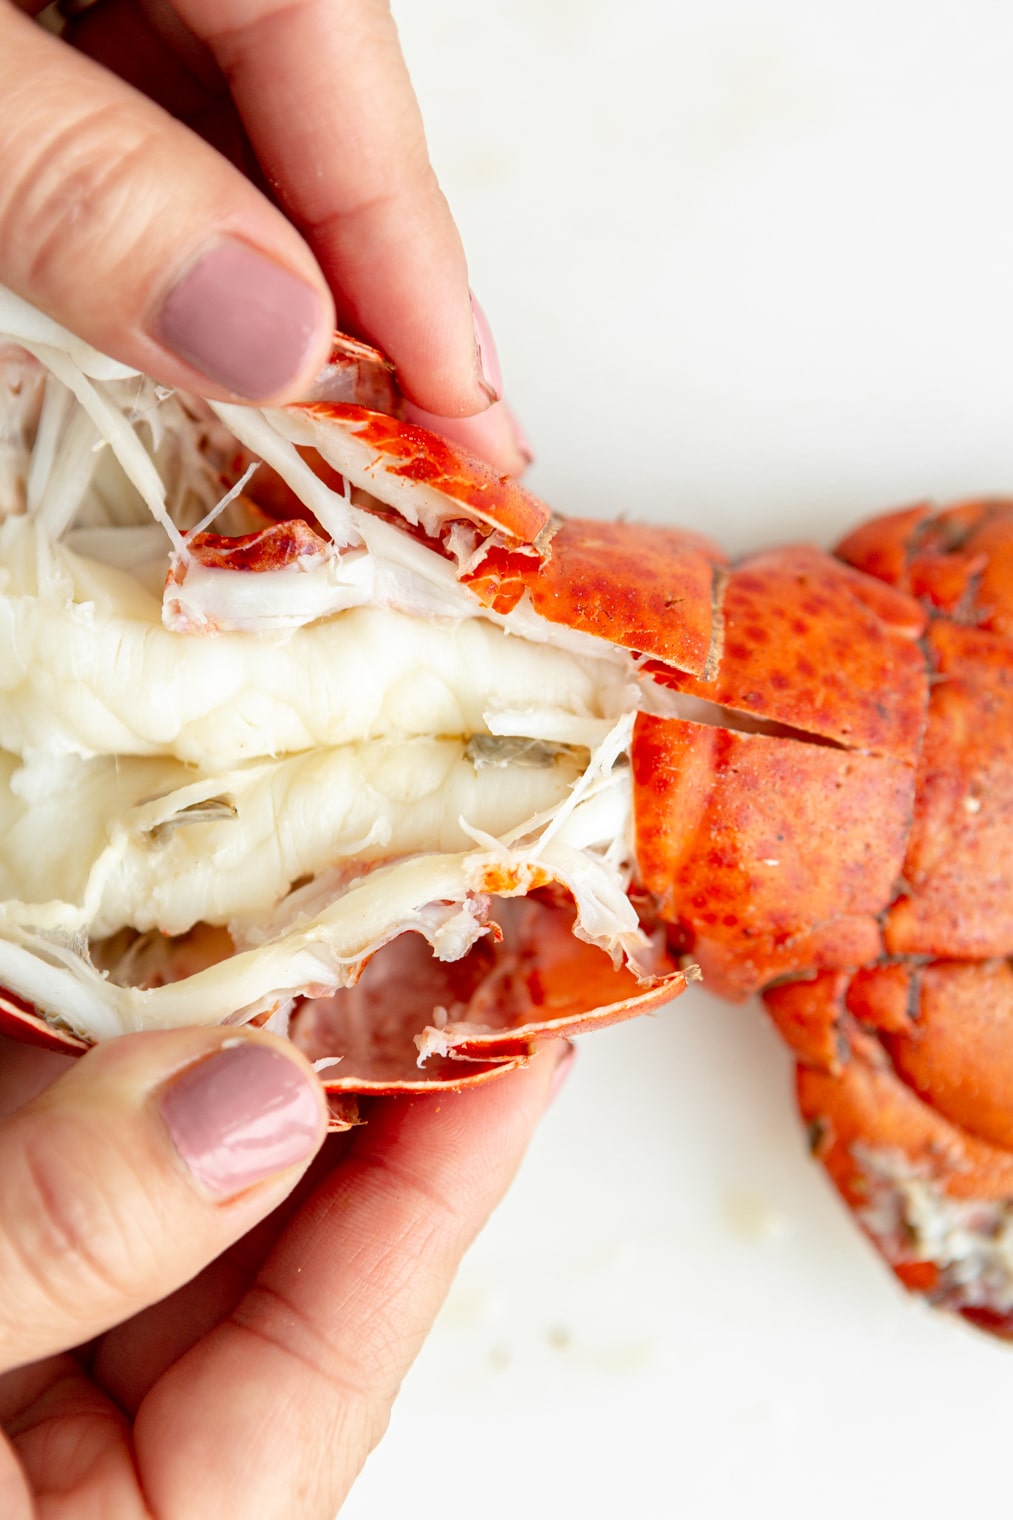 A person using their hands to separate the shell of a lobster tail.